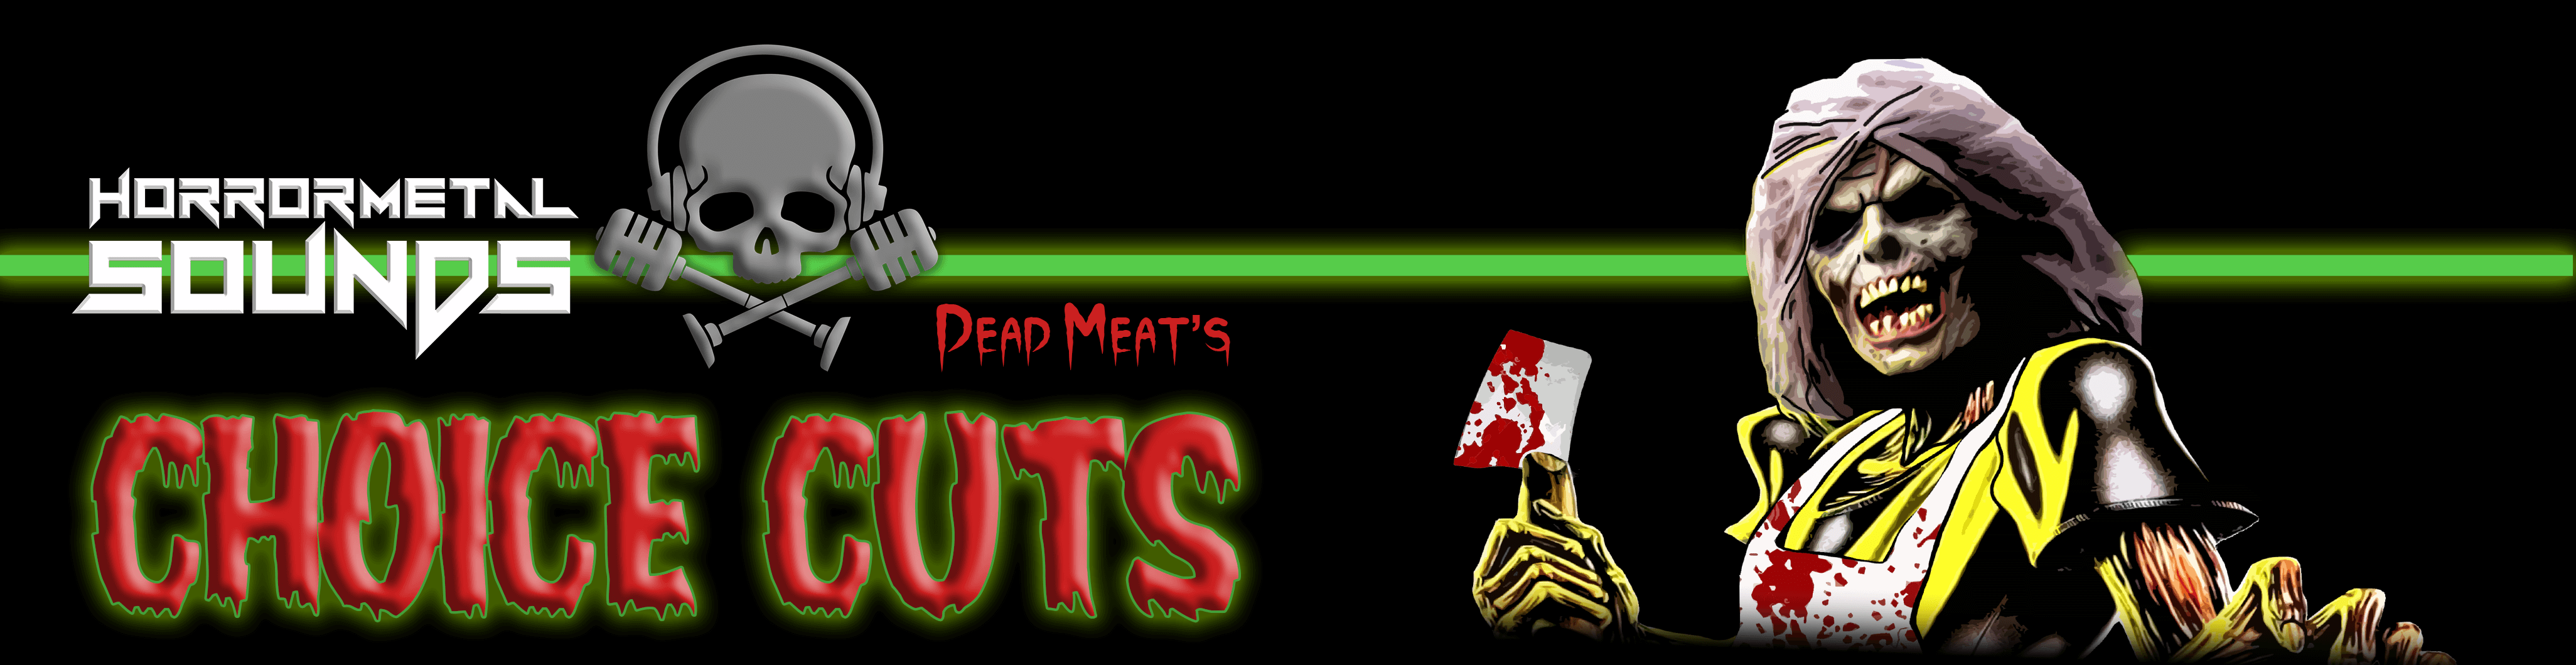 HORROR METAL SOUNDS: DEAD MEAT'S CHOICE CUTS